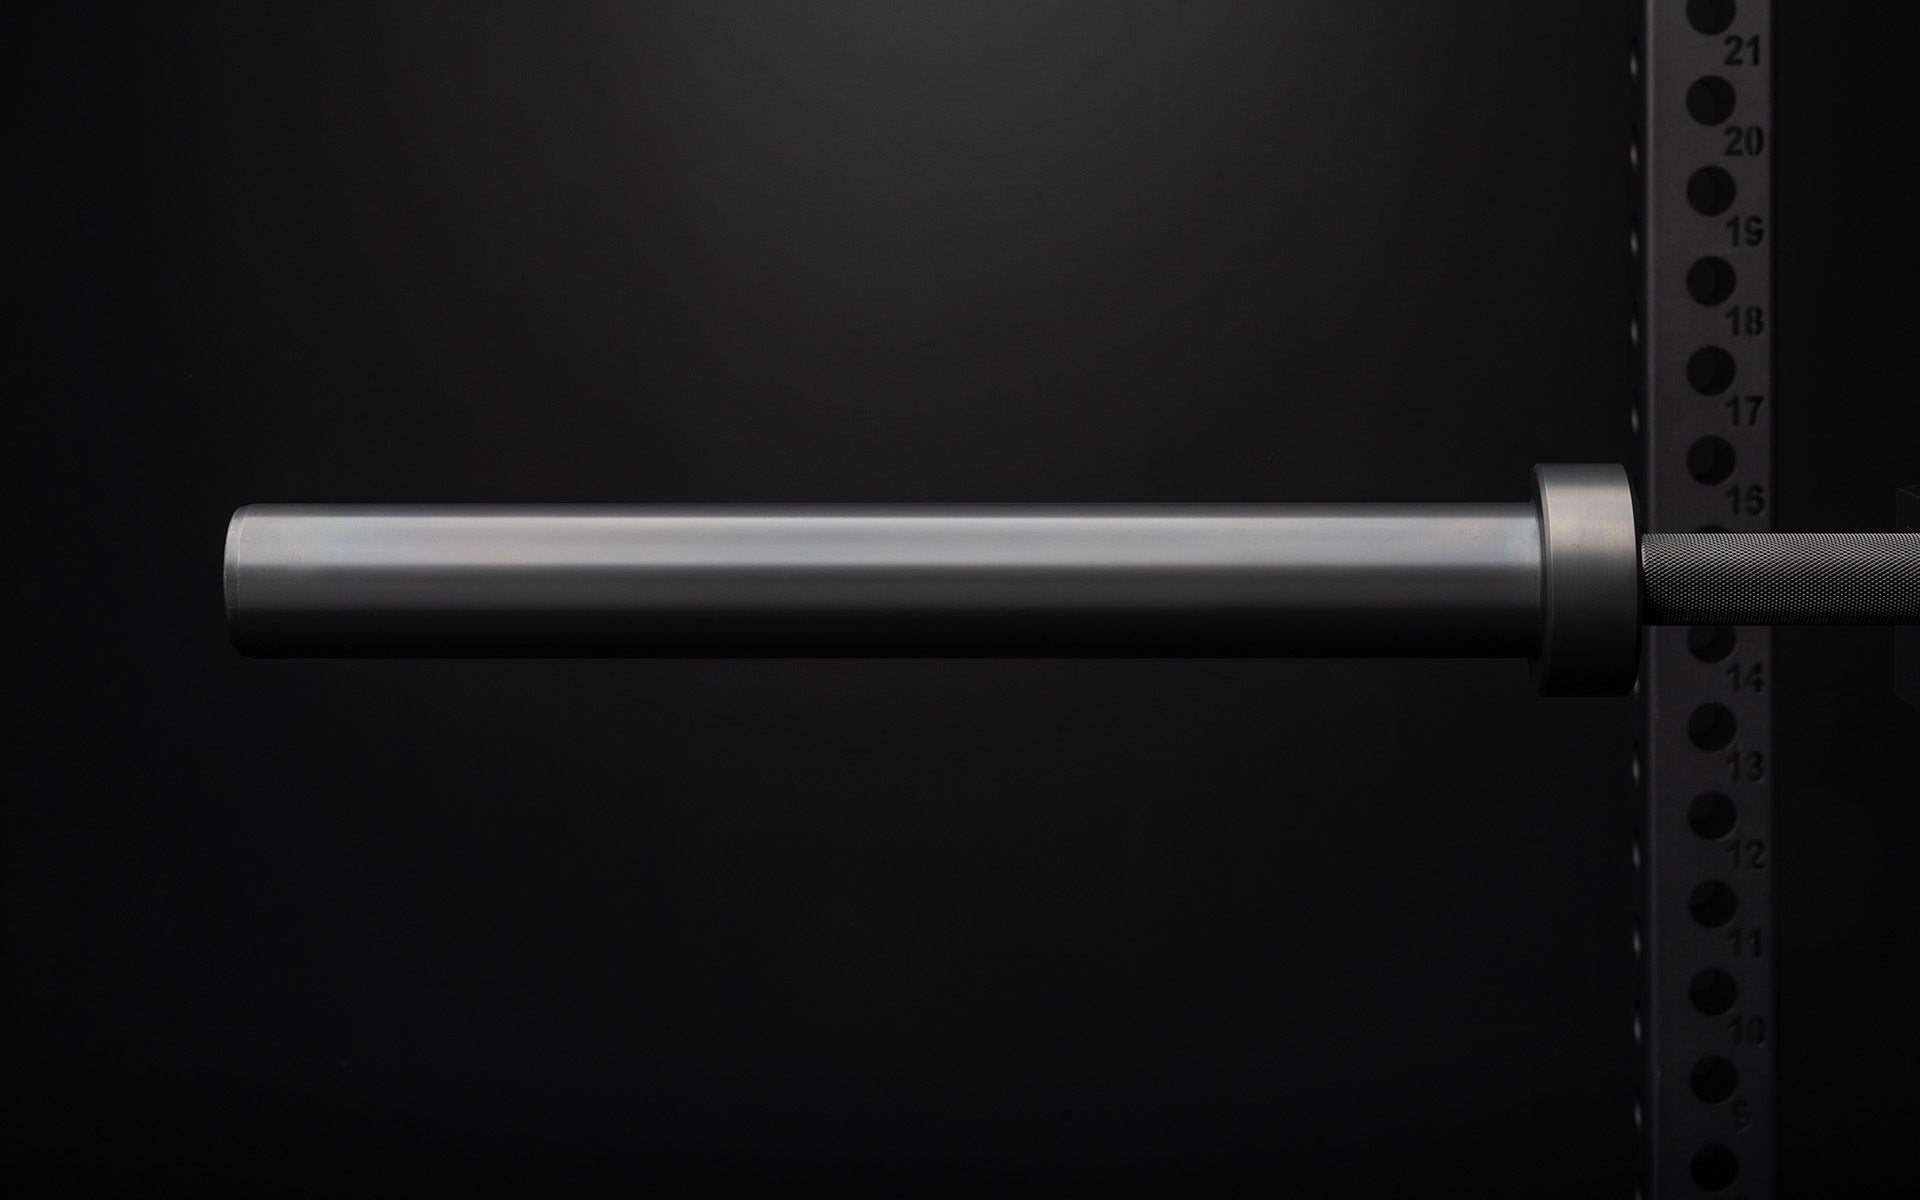 Close-up view of the smooth sleeve of a racked REP Double Black Diamond Power Bar.